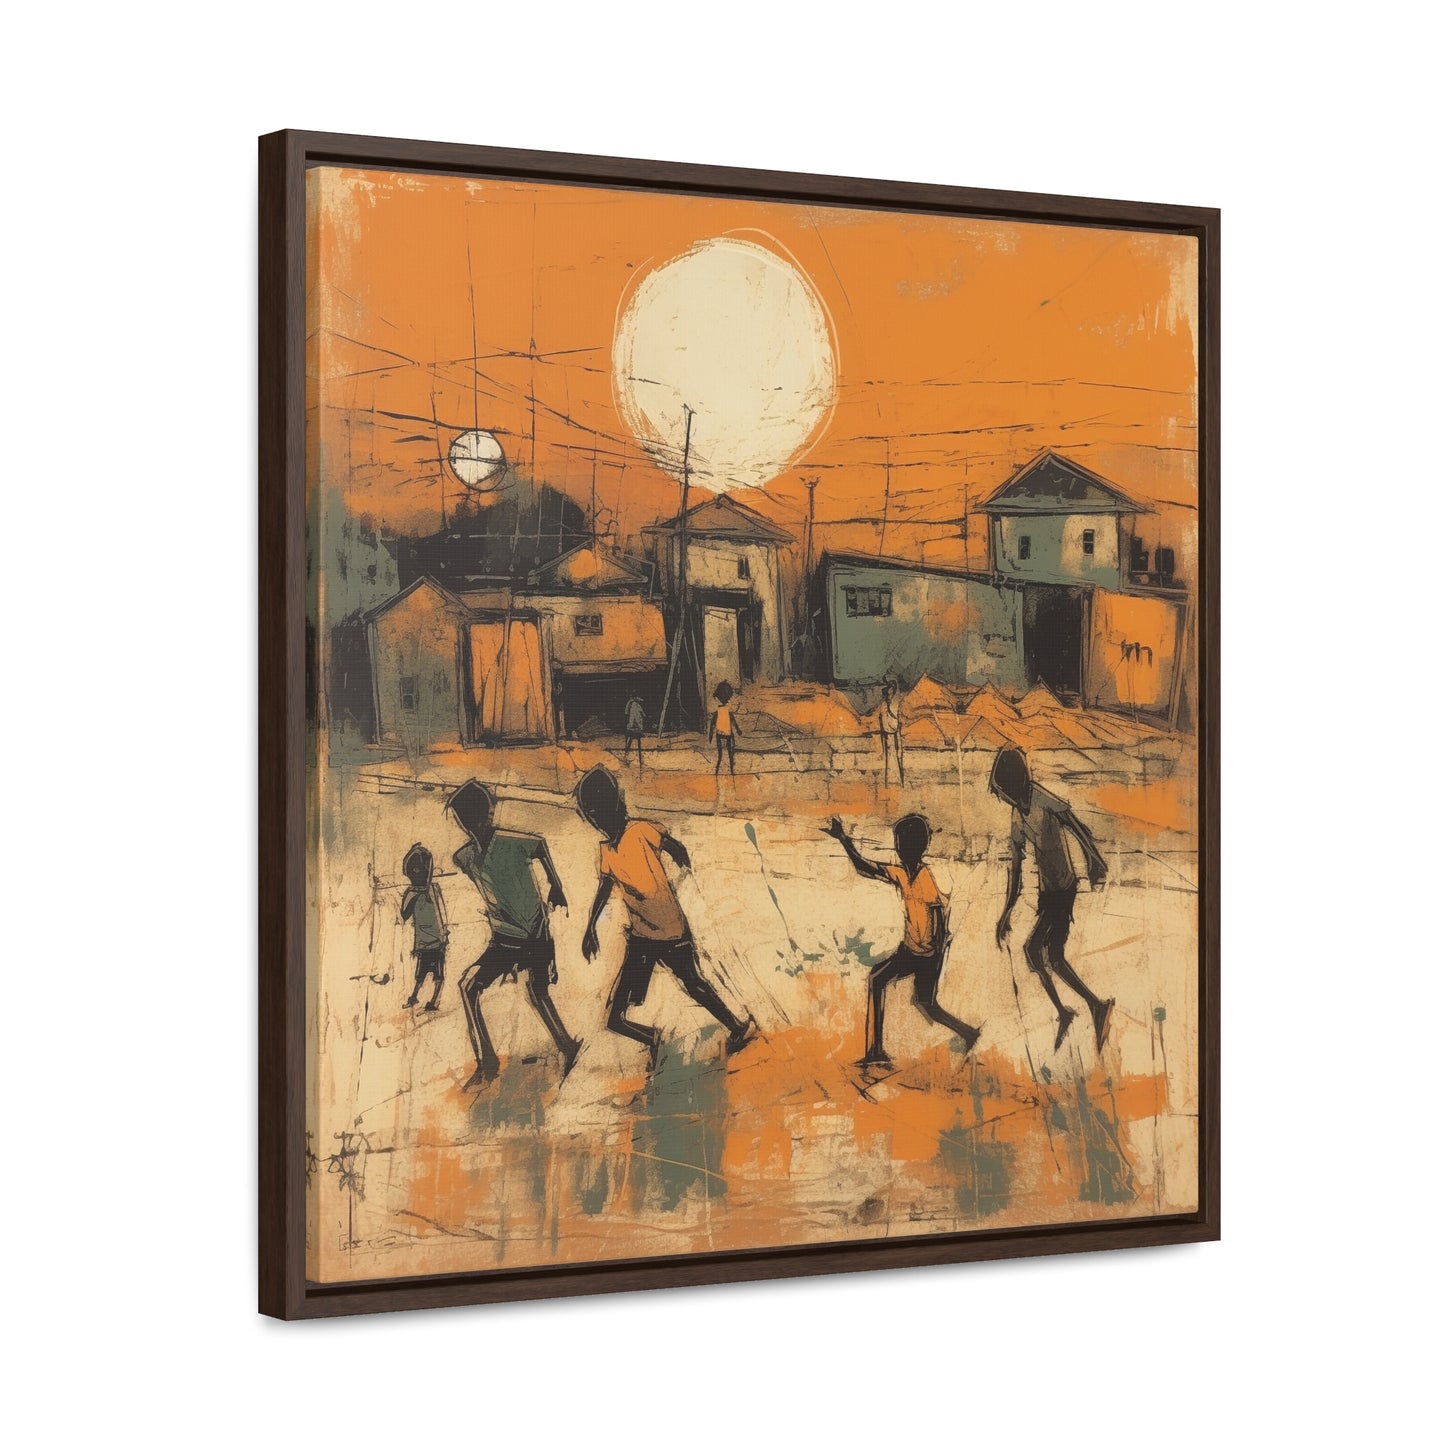 Childhood 37, Gallery Canvas Wraps, Square Frame